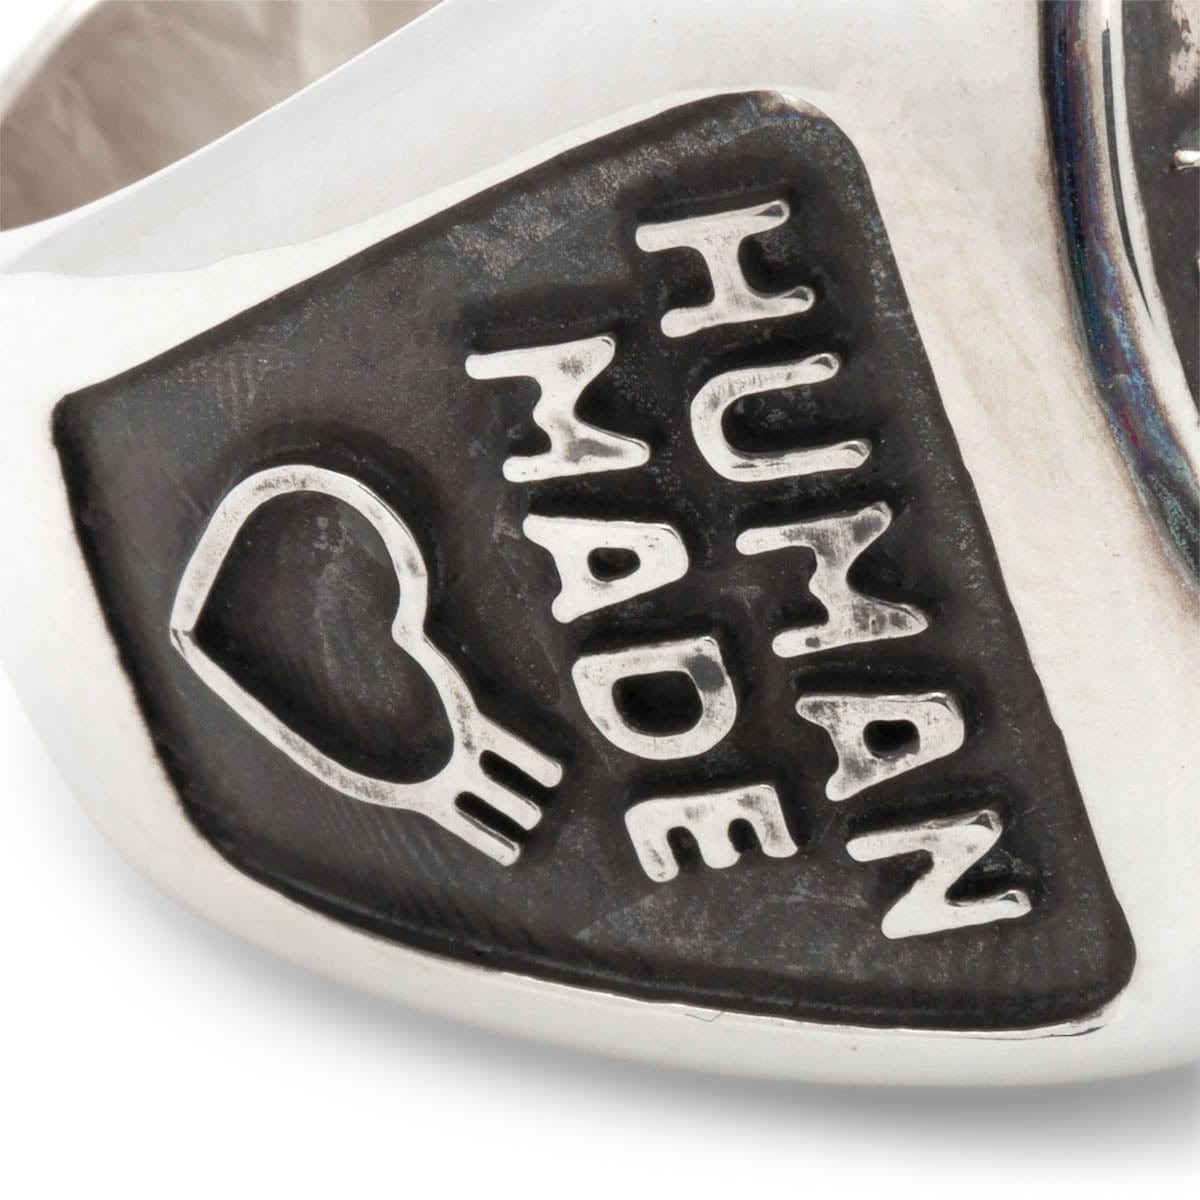 HUMAN MADE Heart Silver Collection Release Date